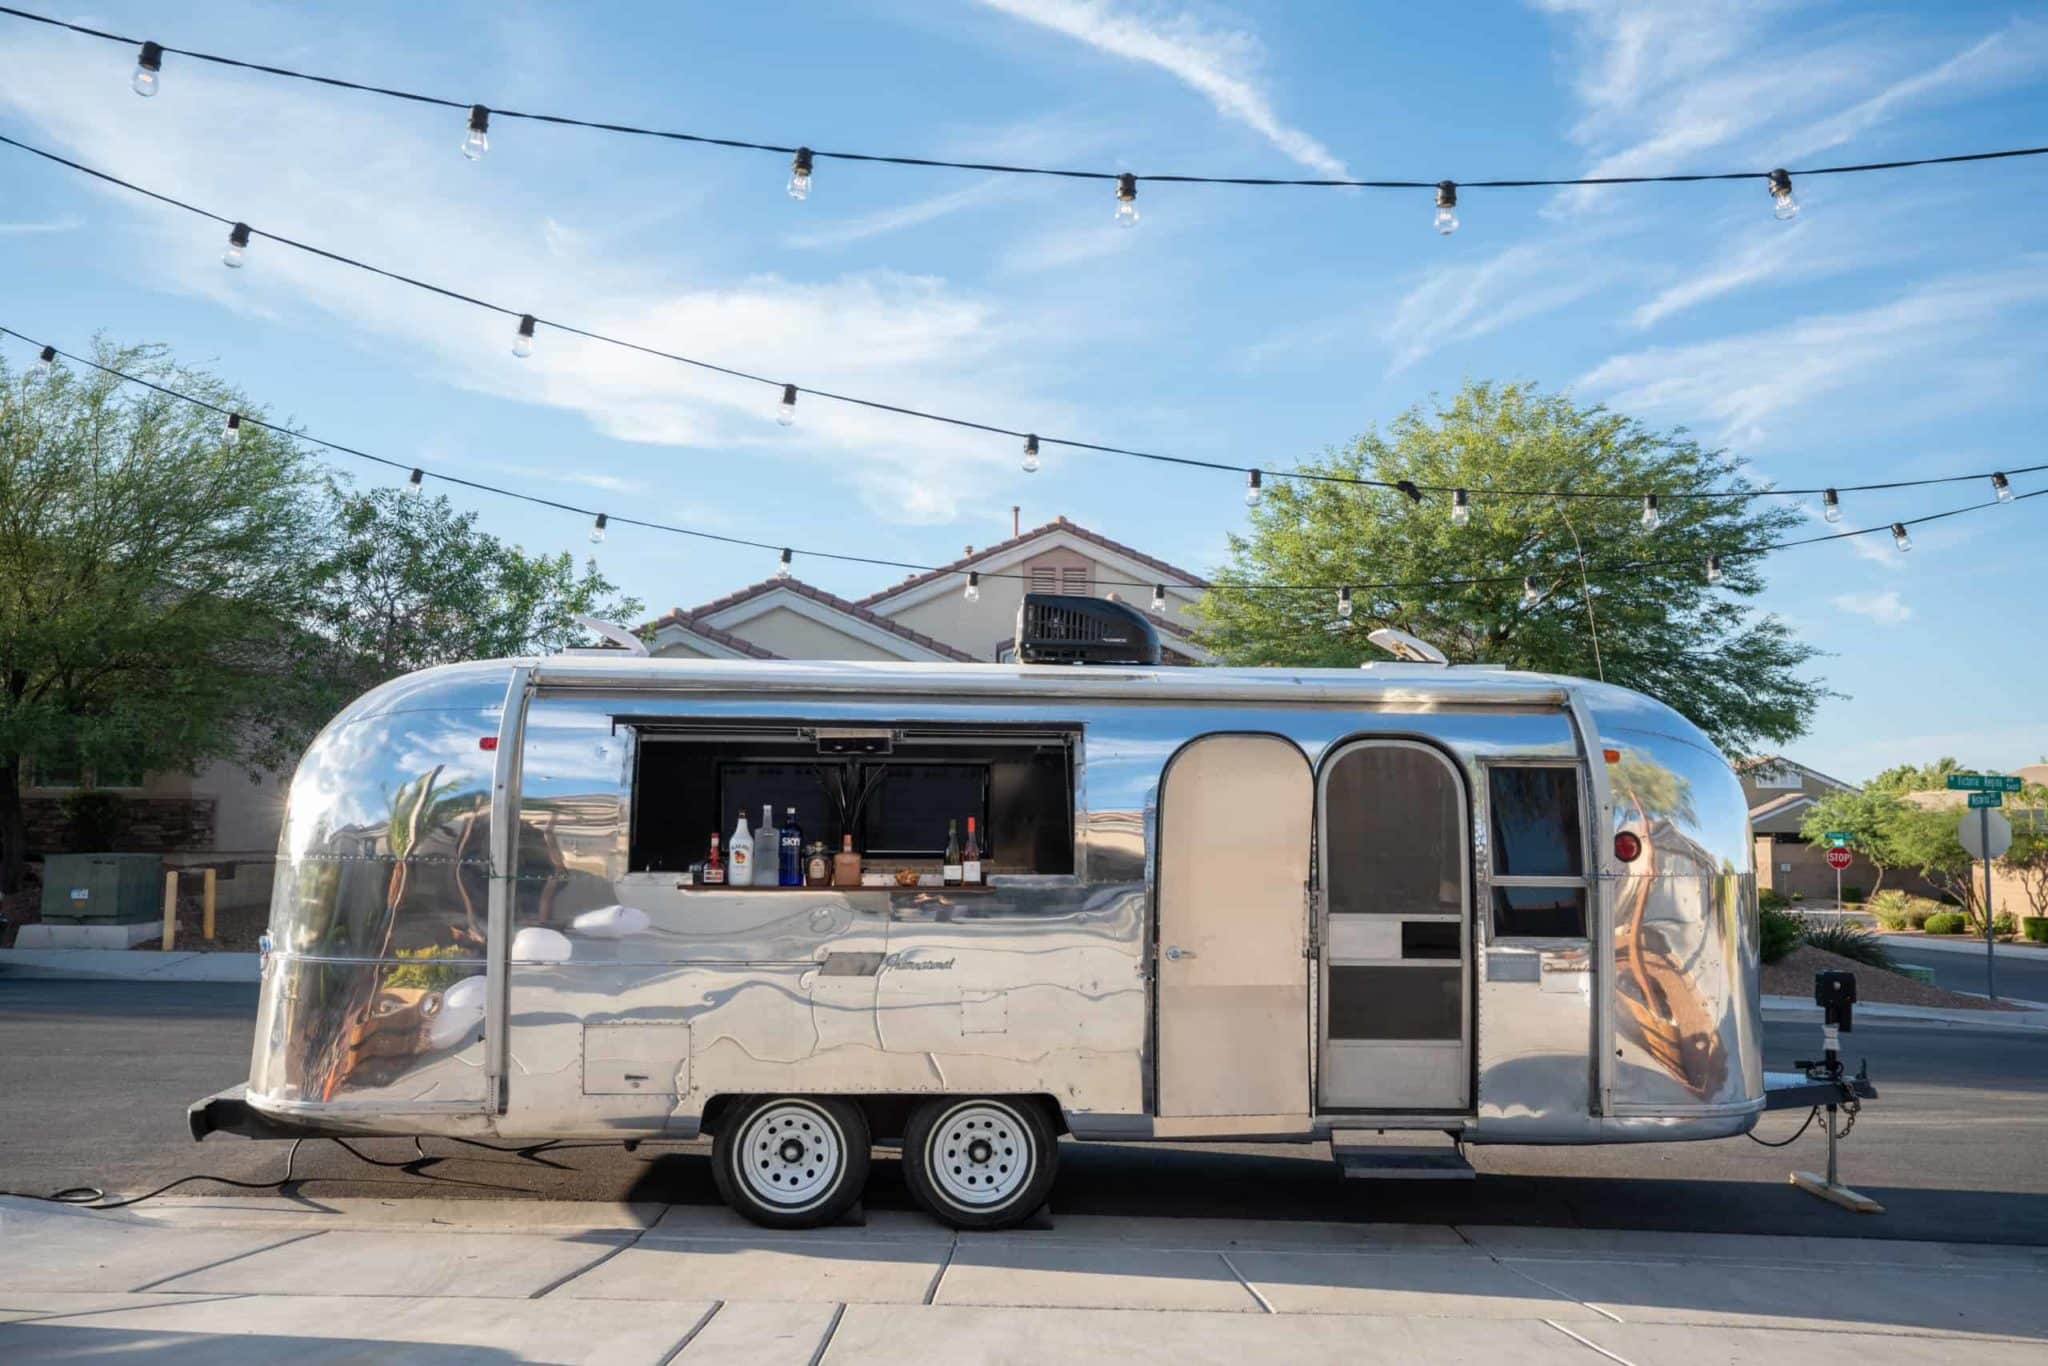 1965 airstream land yacht for sale